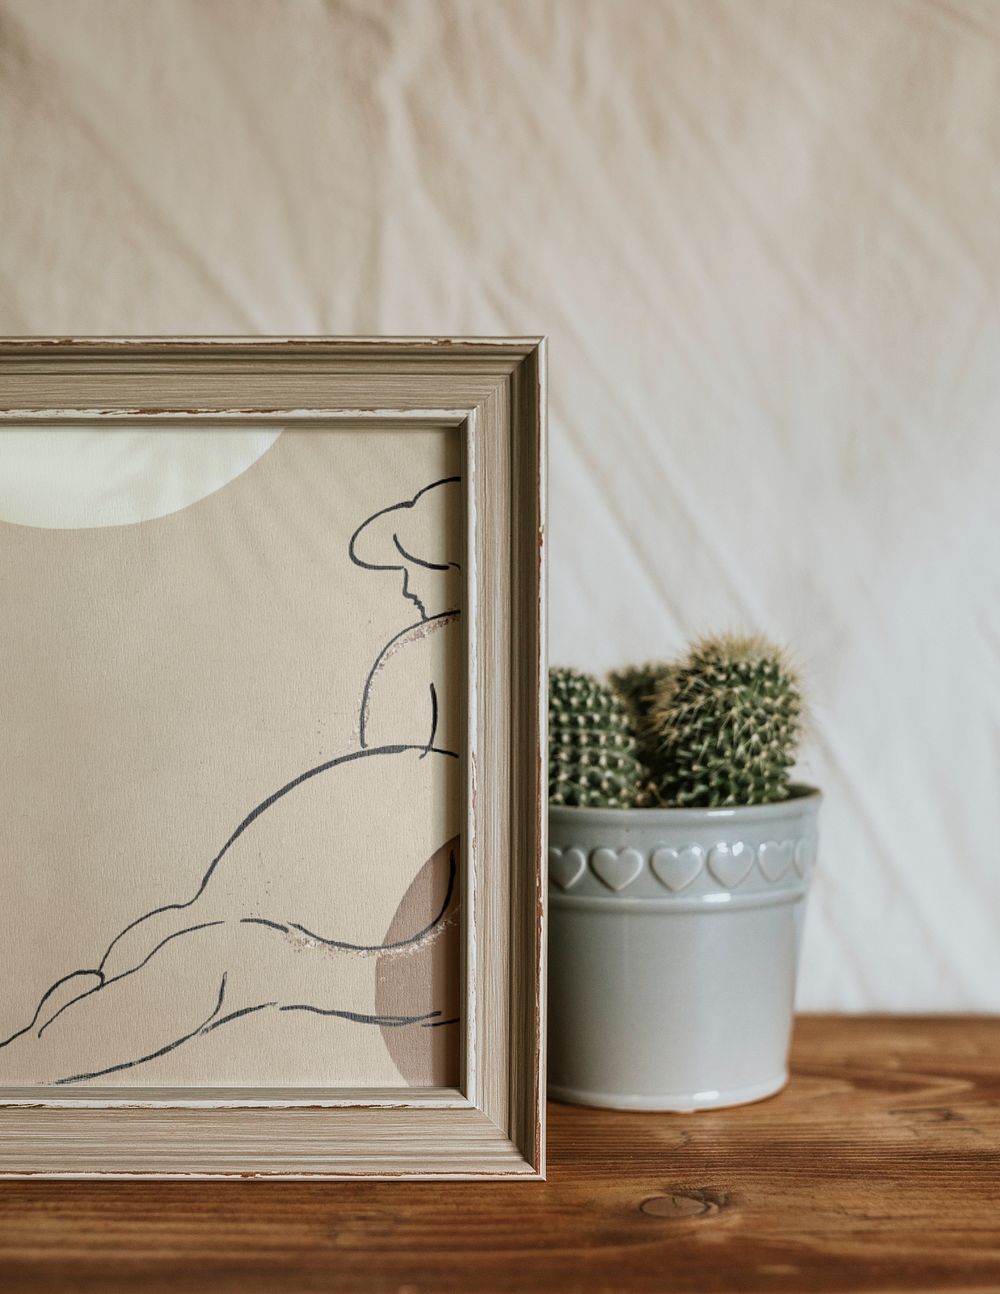 Female nude art in picture frame, aesthetic home decor